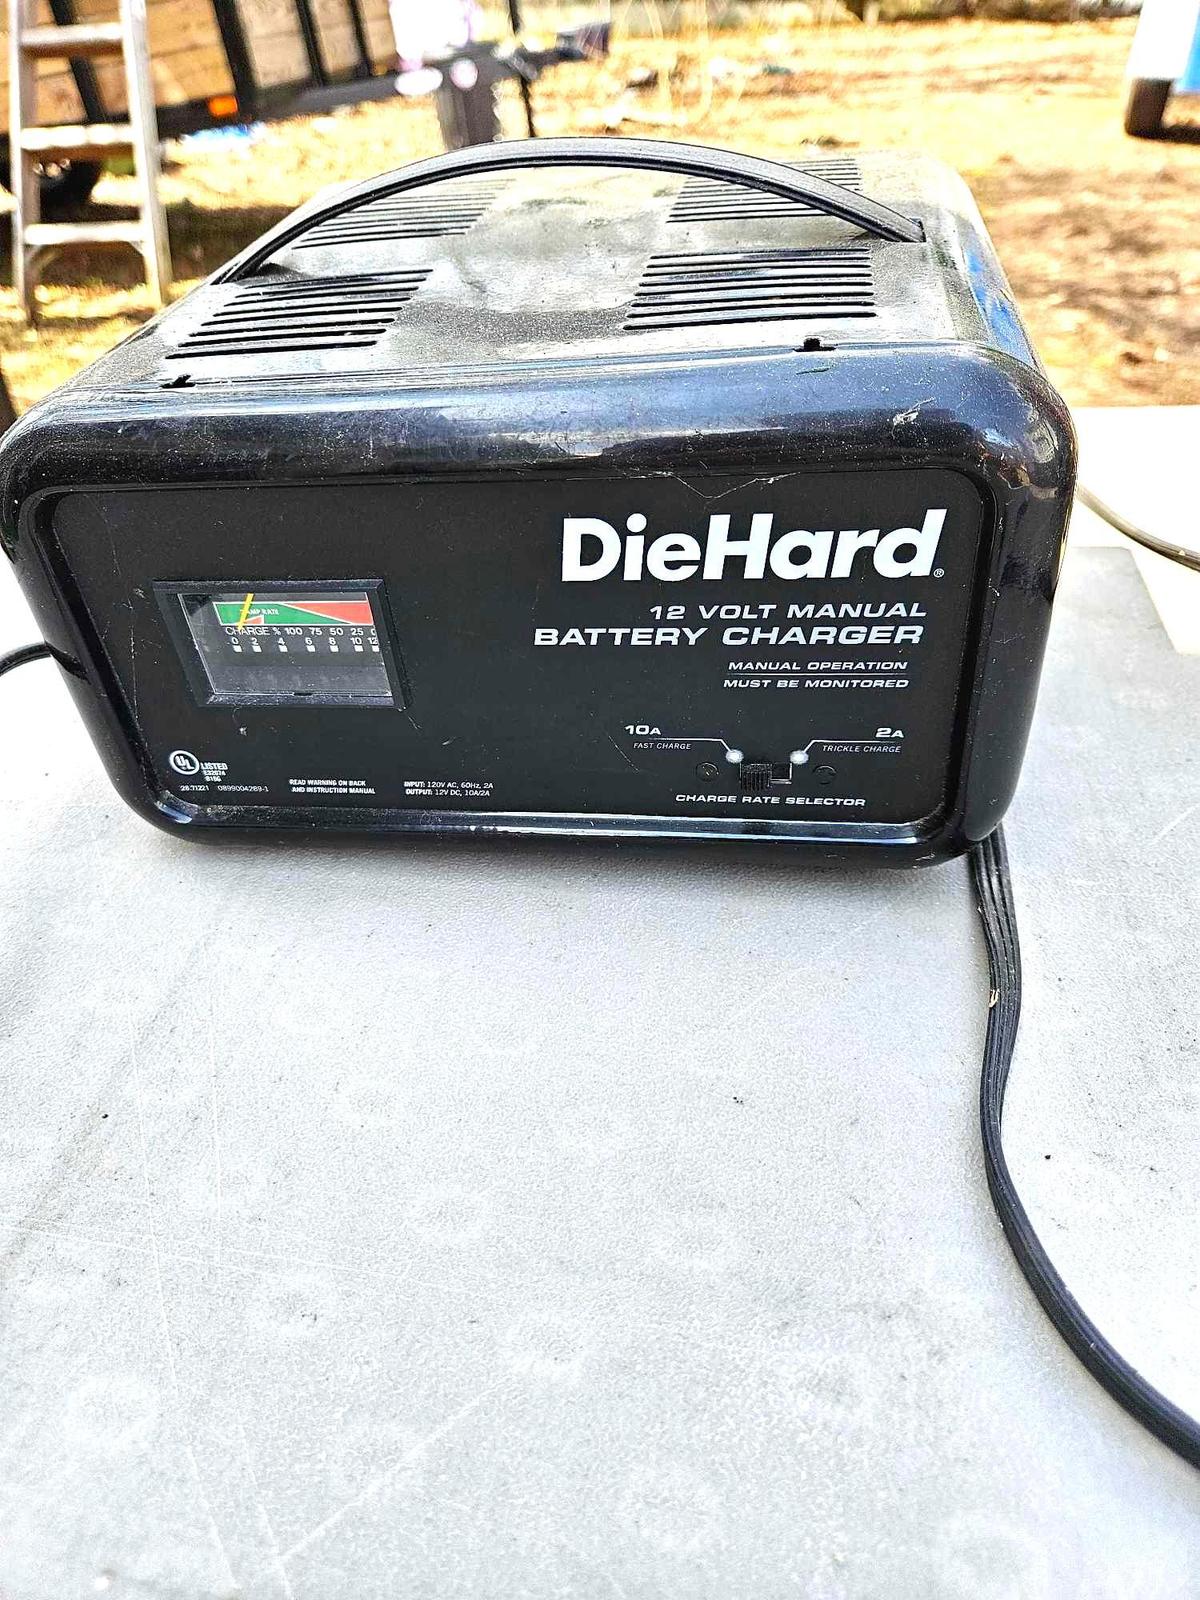 Die hard battery charger